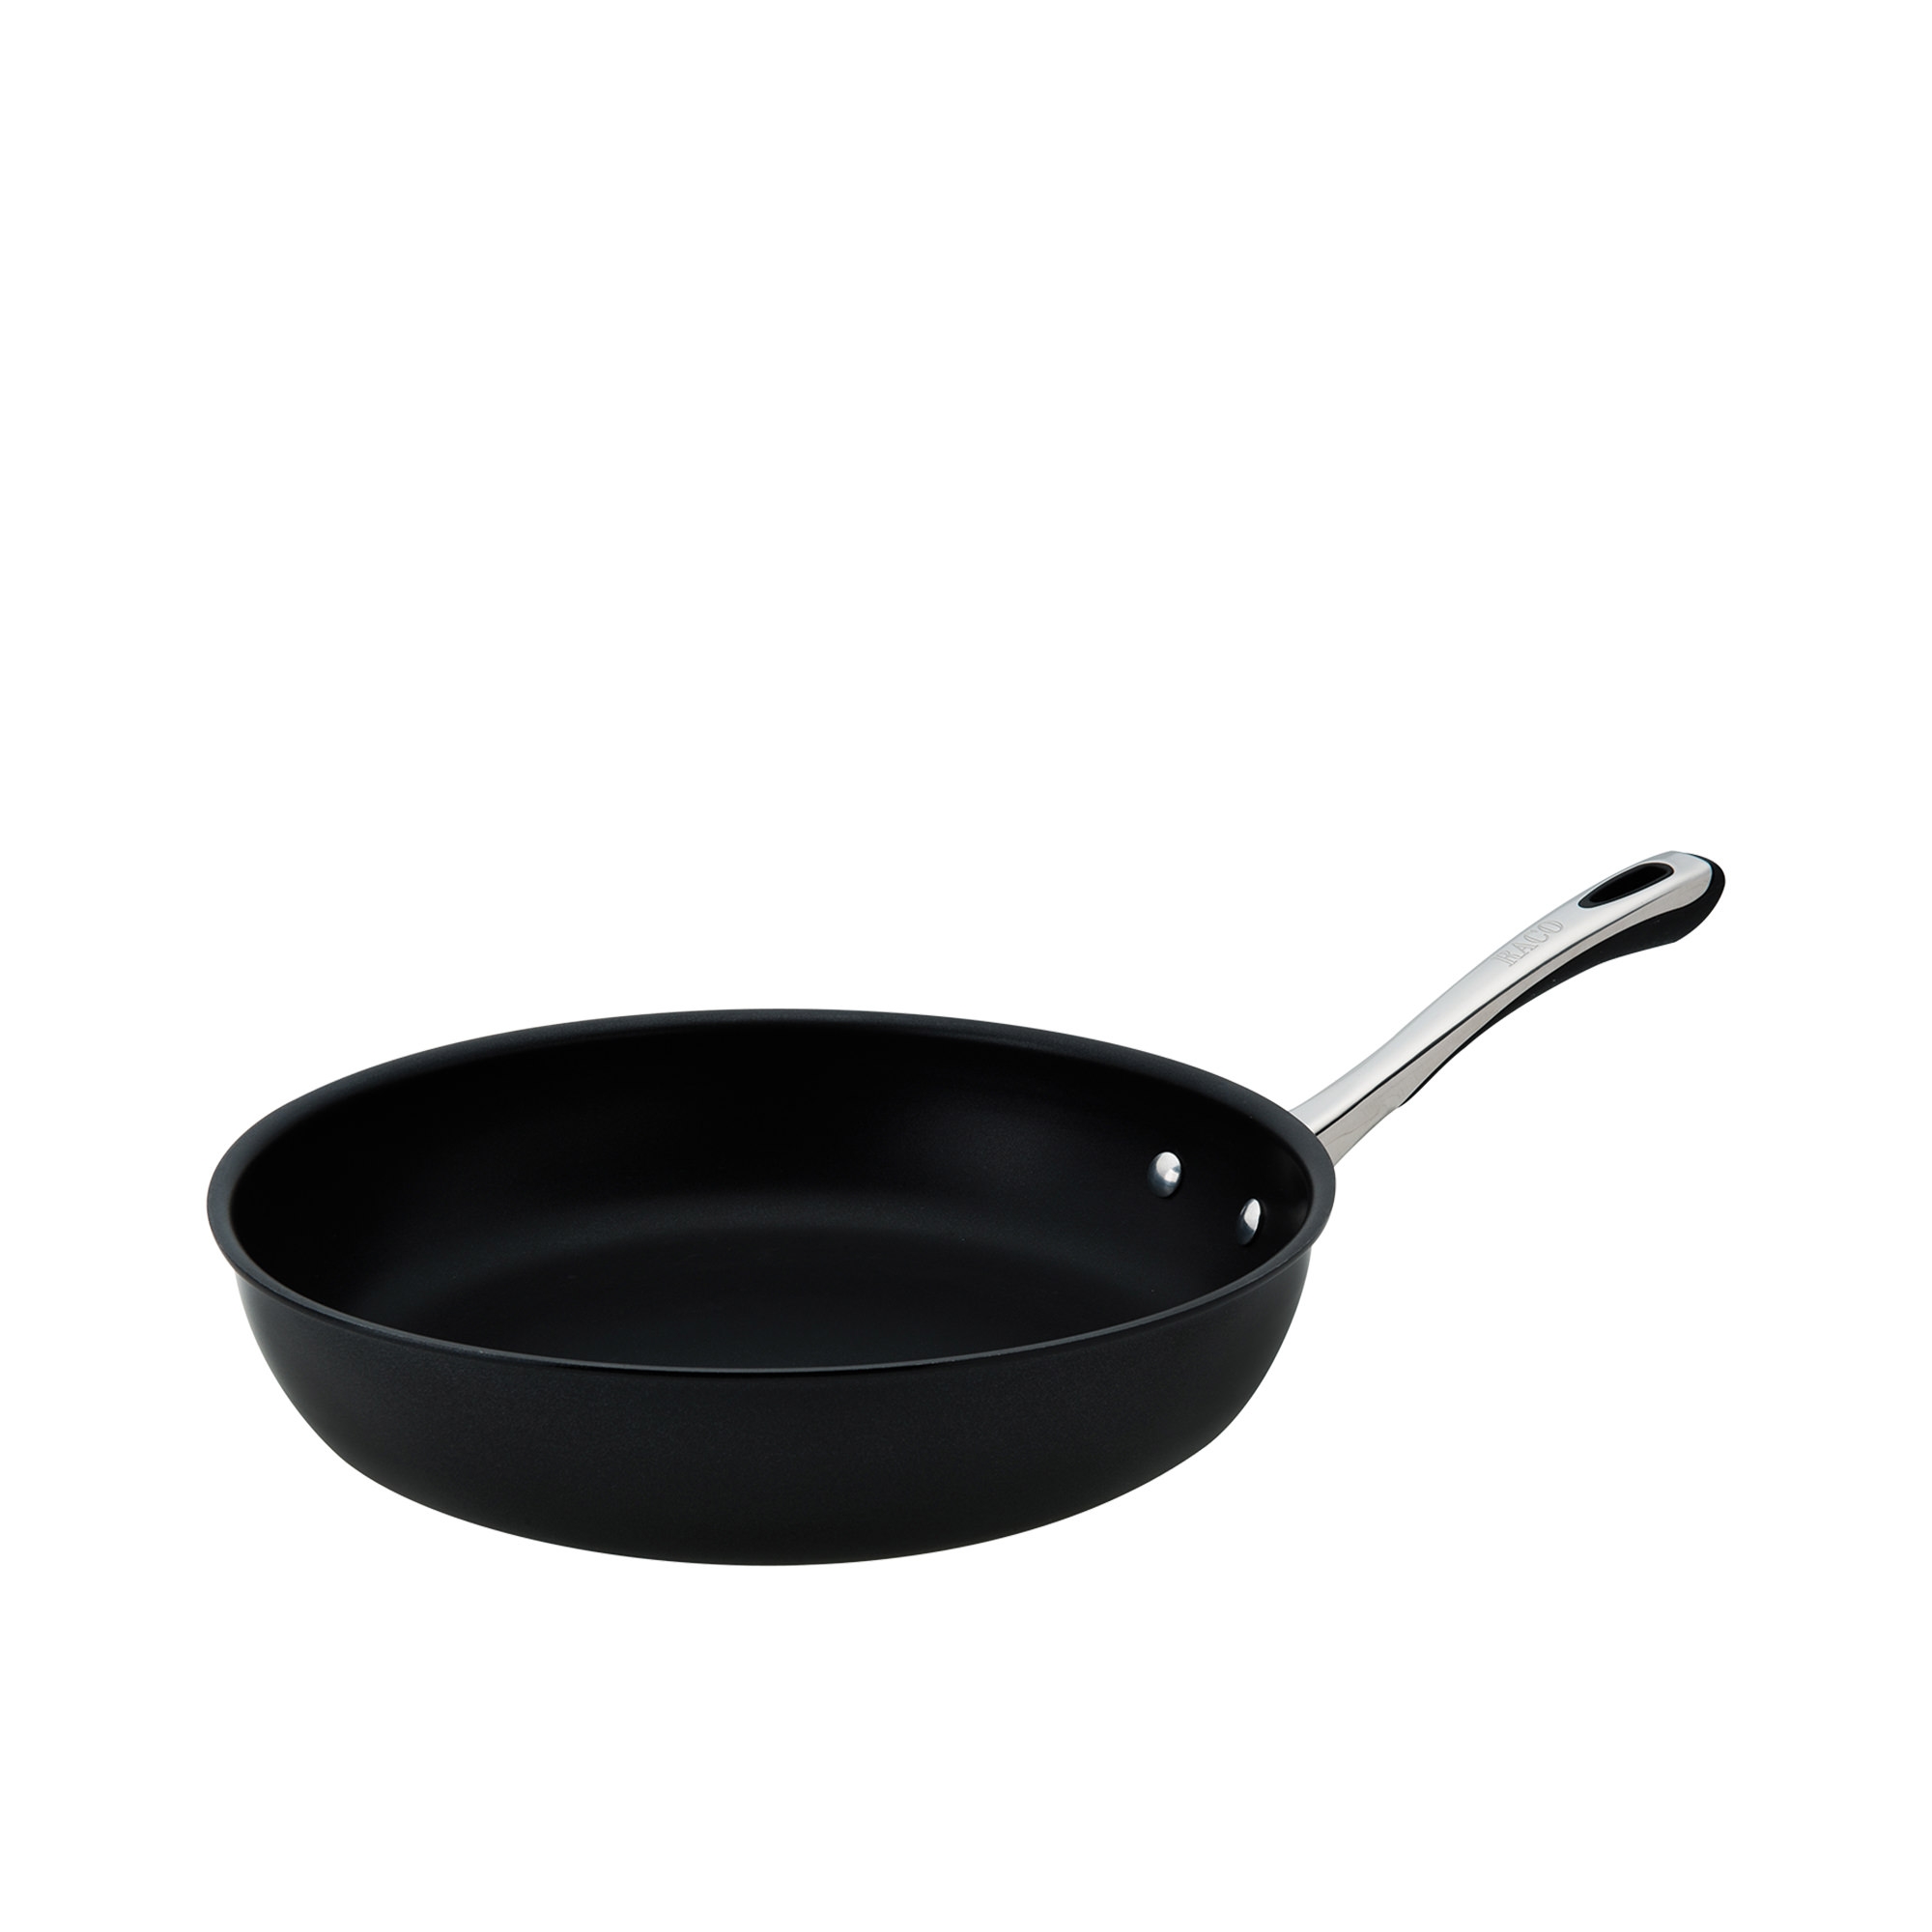 Raco Contemporary French Skillet 24cm Image 1